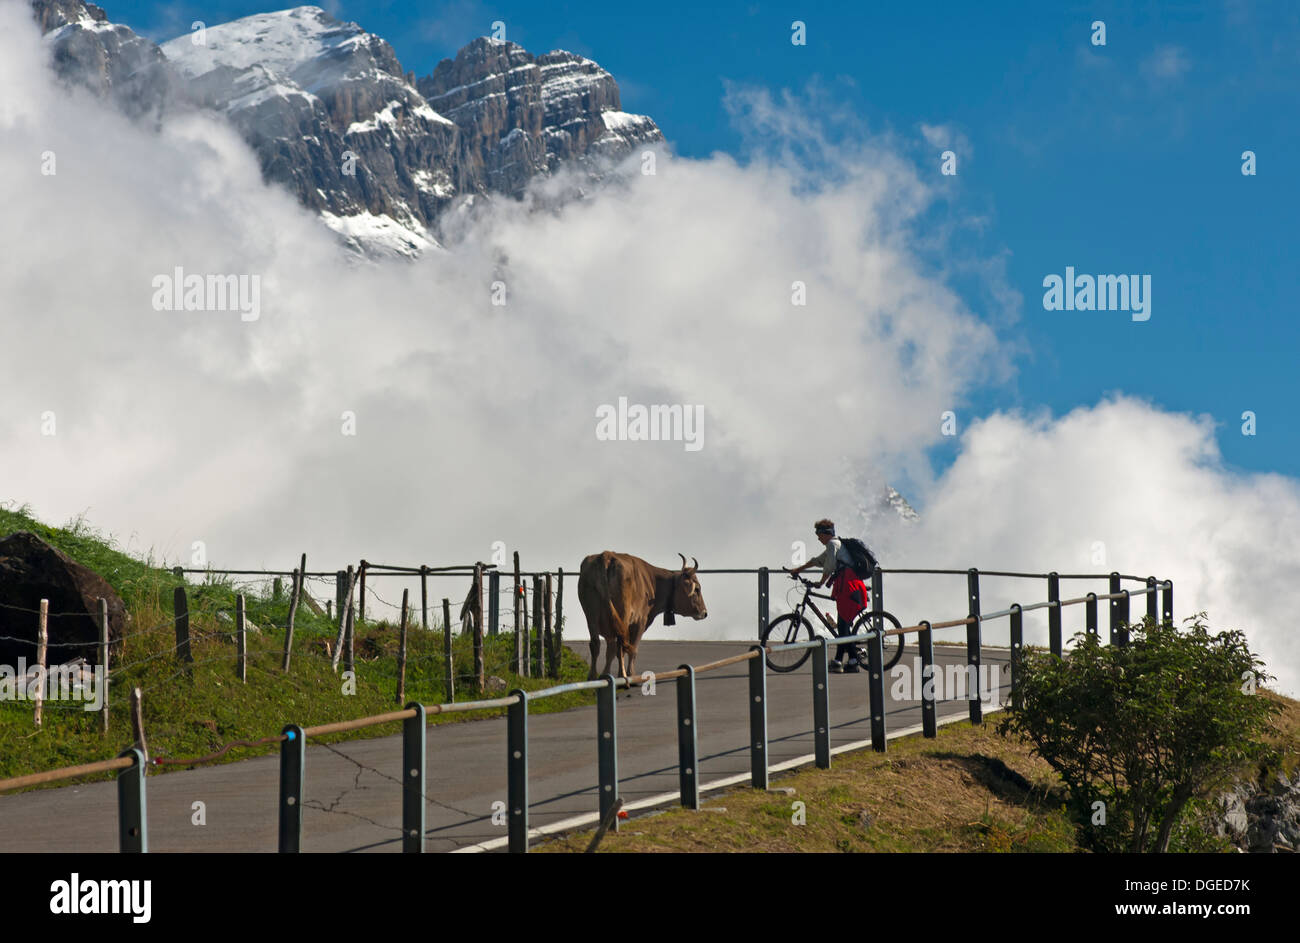 Encounter between biker and cow on the mountain road Klausenpass-Strasse, Urnerboden, Canton of Uri, Switzerland Stock Photo